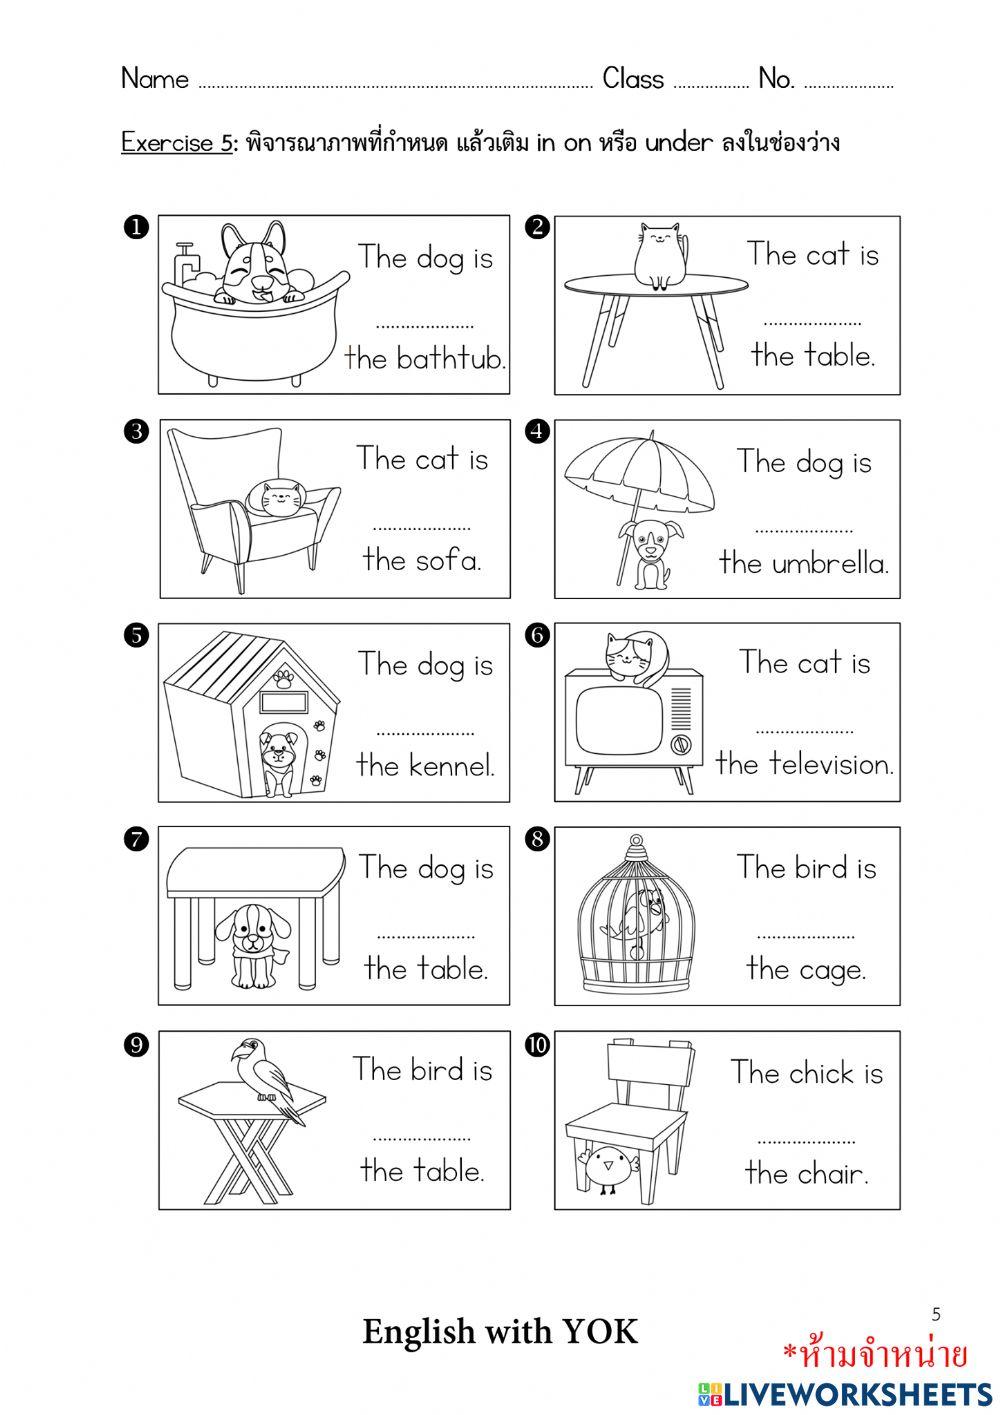 Prepositions in on under